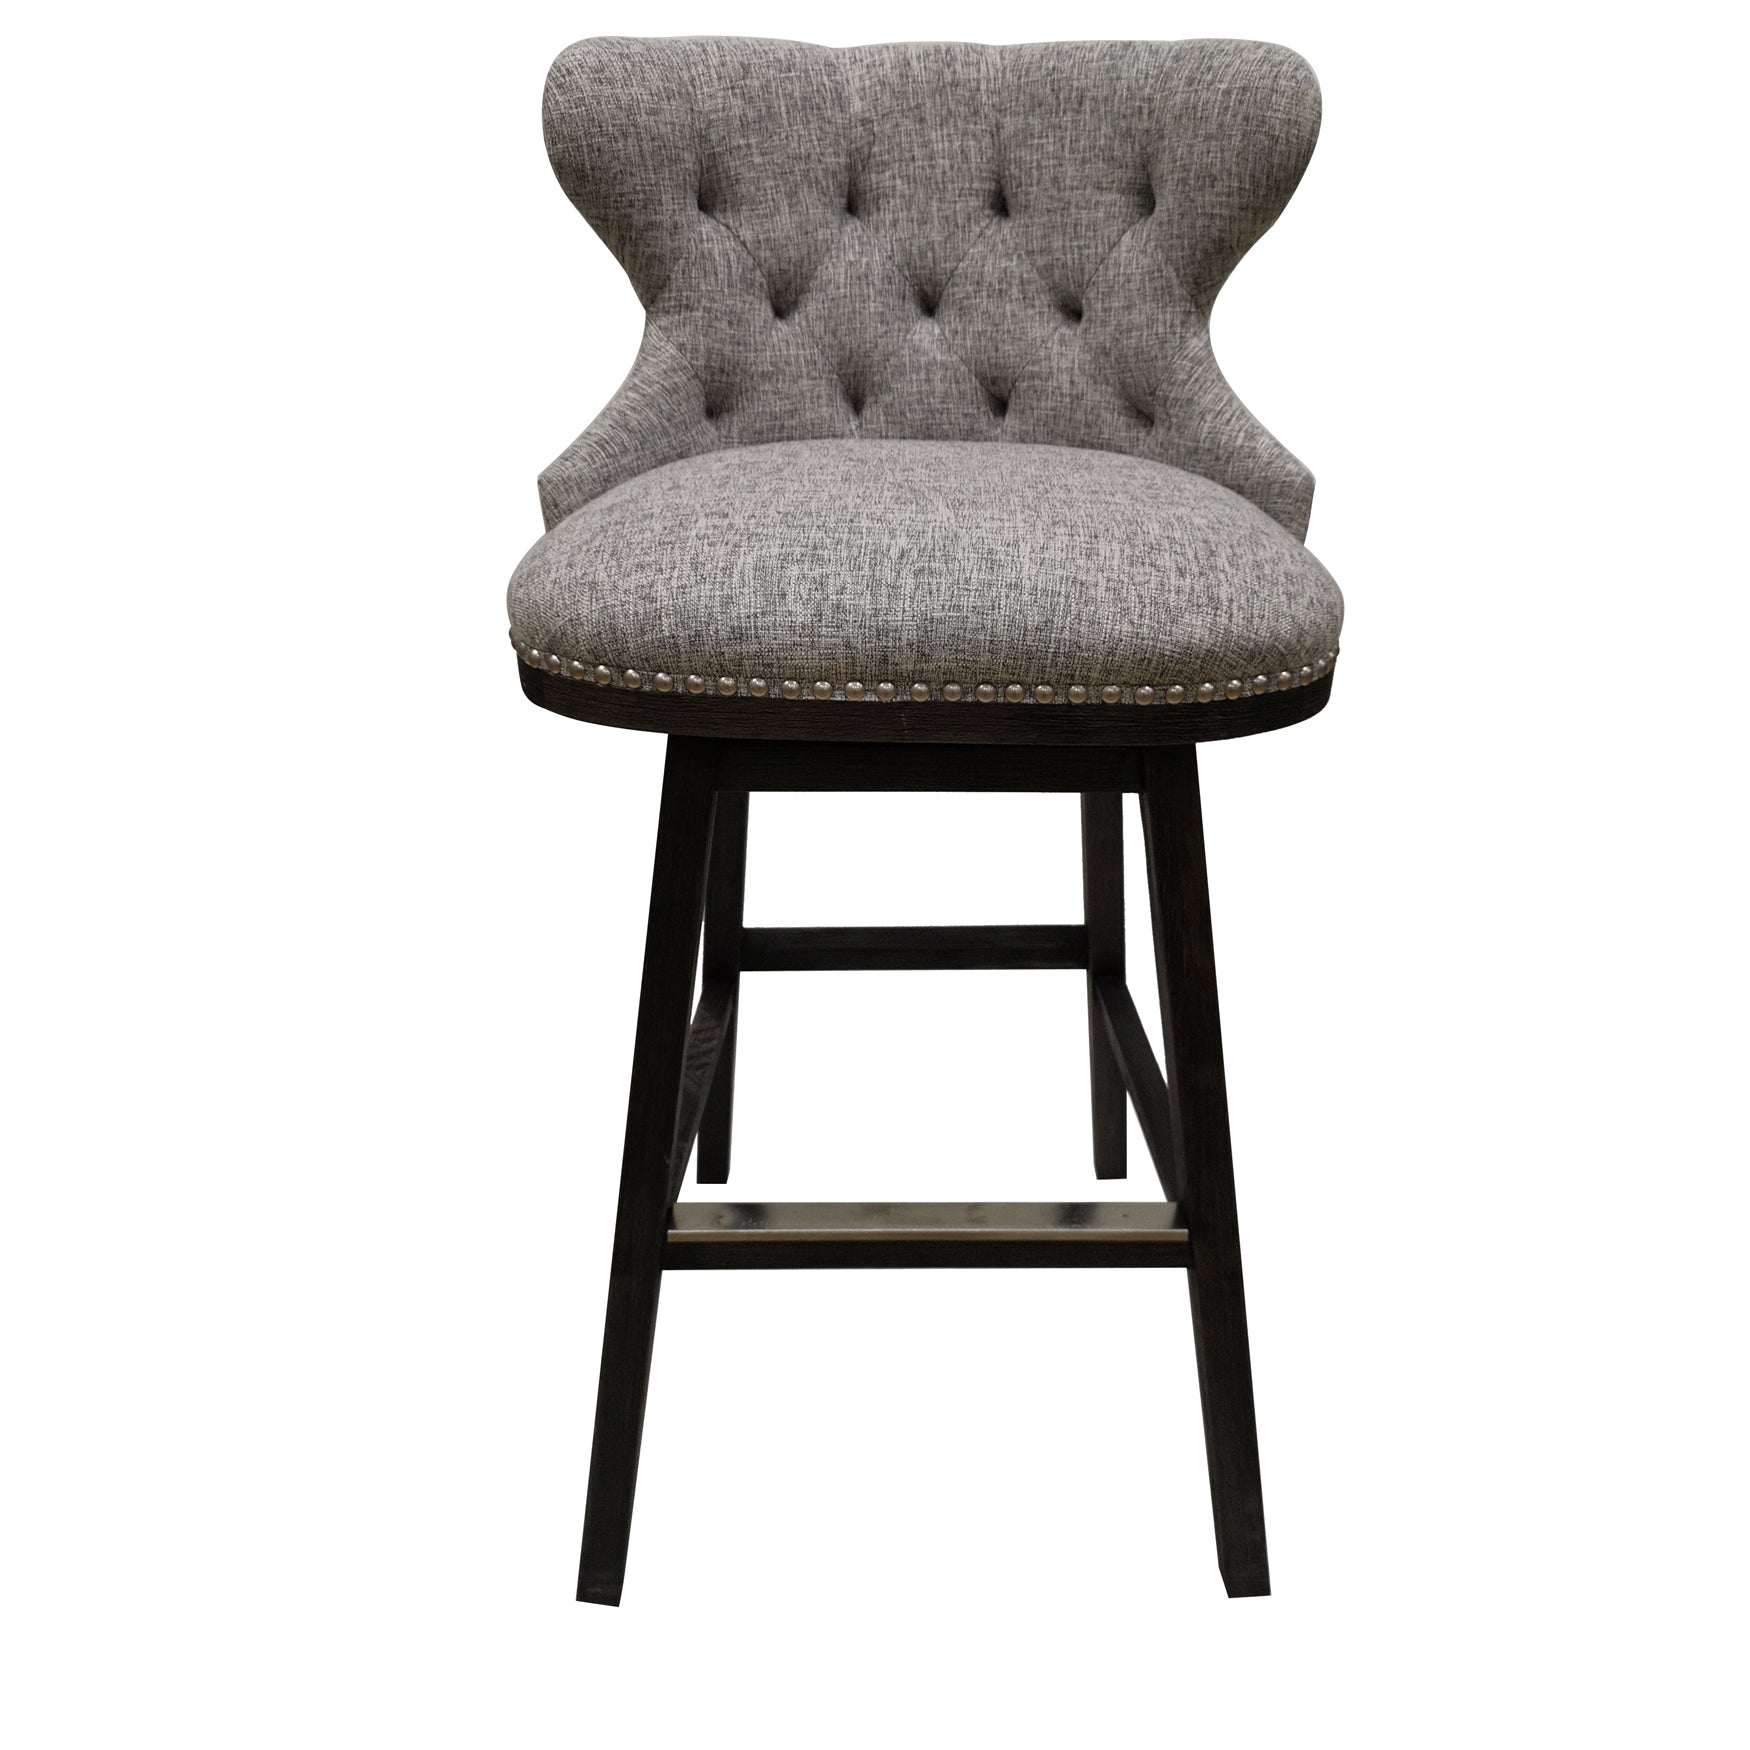 Crestview Collection Baltimore 21" x 20" x 40" Traditional Fabric And Wood Bar Stool